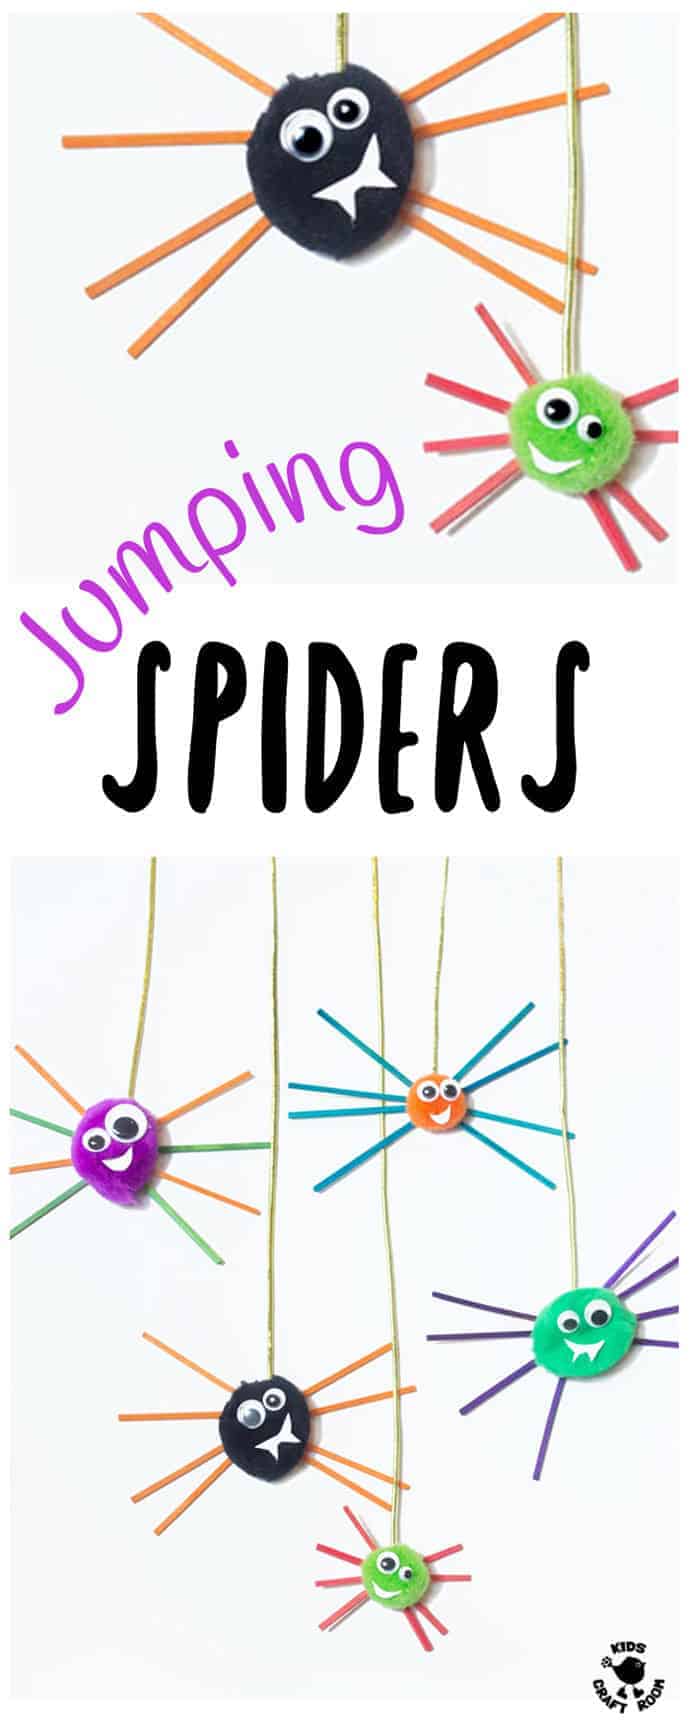 JUMPING SPIDER CRAFT - These are the cutest, bounciest little spiders ever! So quick, easy and cheap for kids to make and play with. Fun all year round. #spider #spidercrafts #kidscrafts #craftsforkids #kidsactivities #spiders #kidscraftroom #homemadetoys #jumpingspiders #halloween #halloweencrafts #halloweencraftsforkids